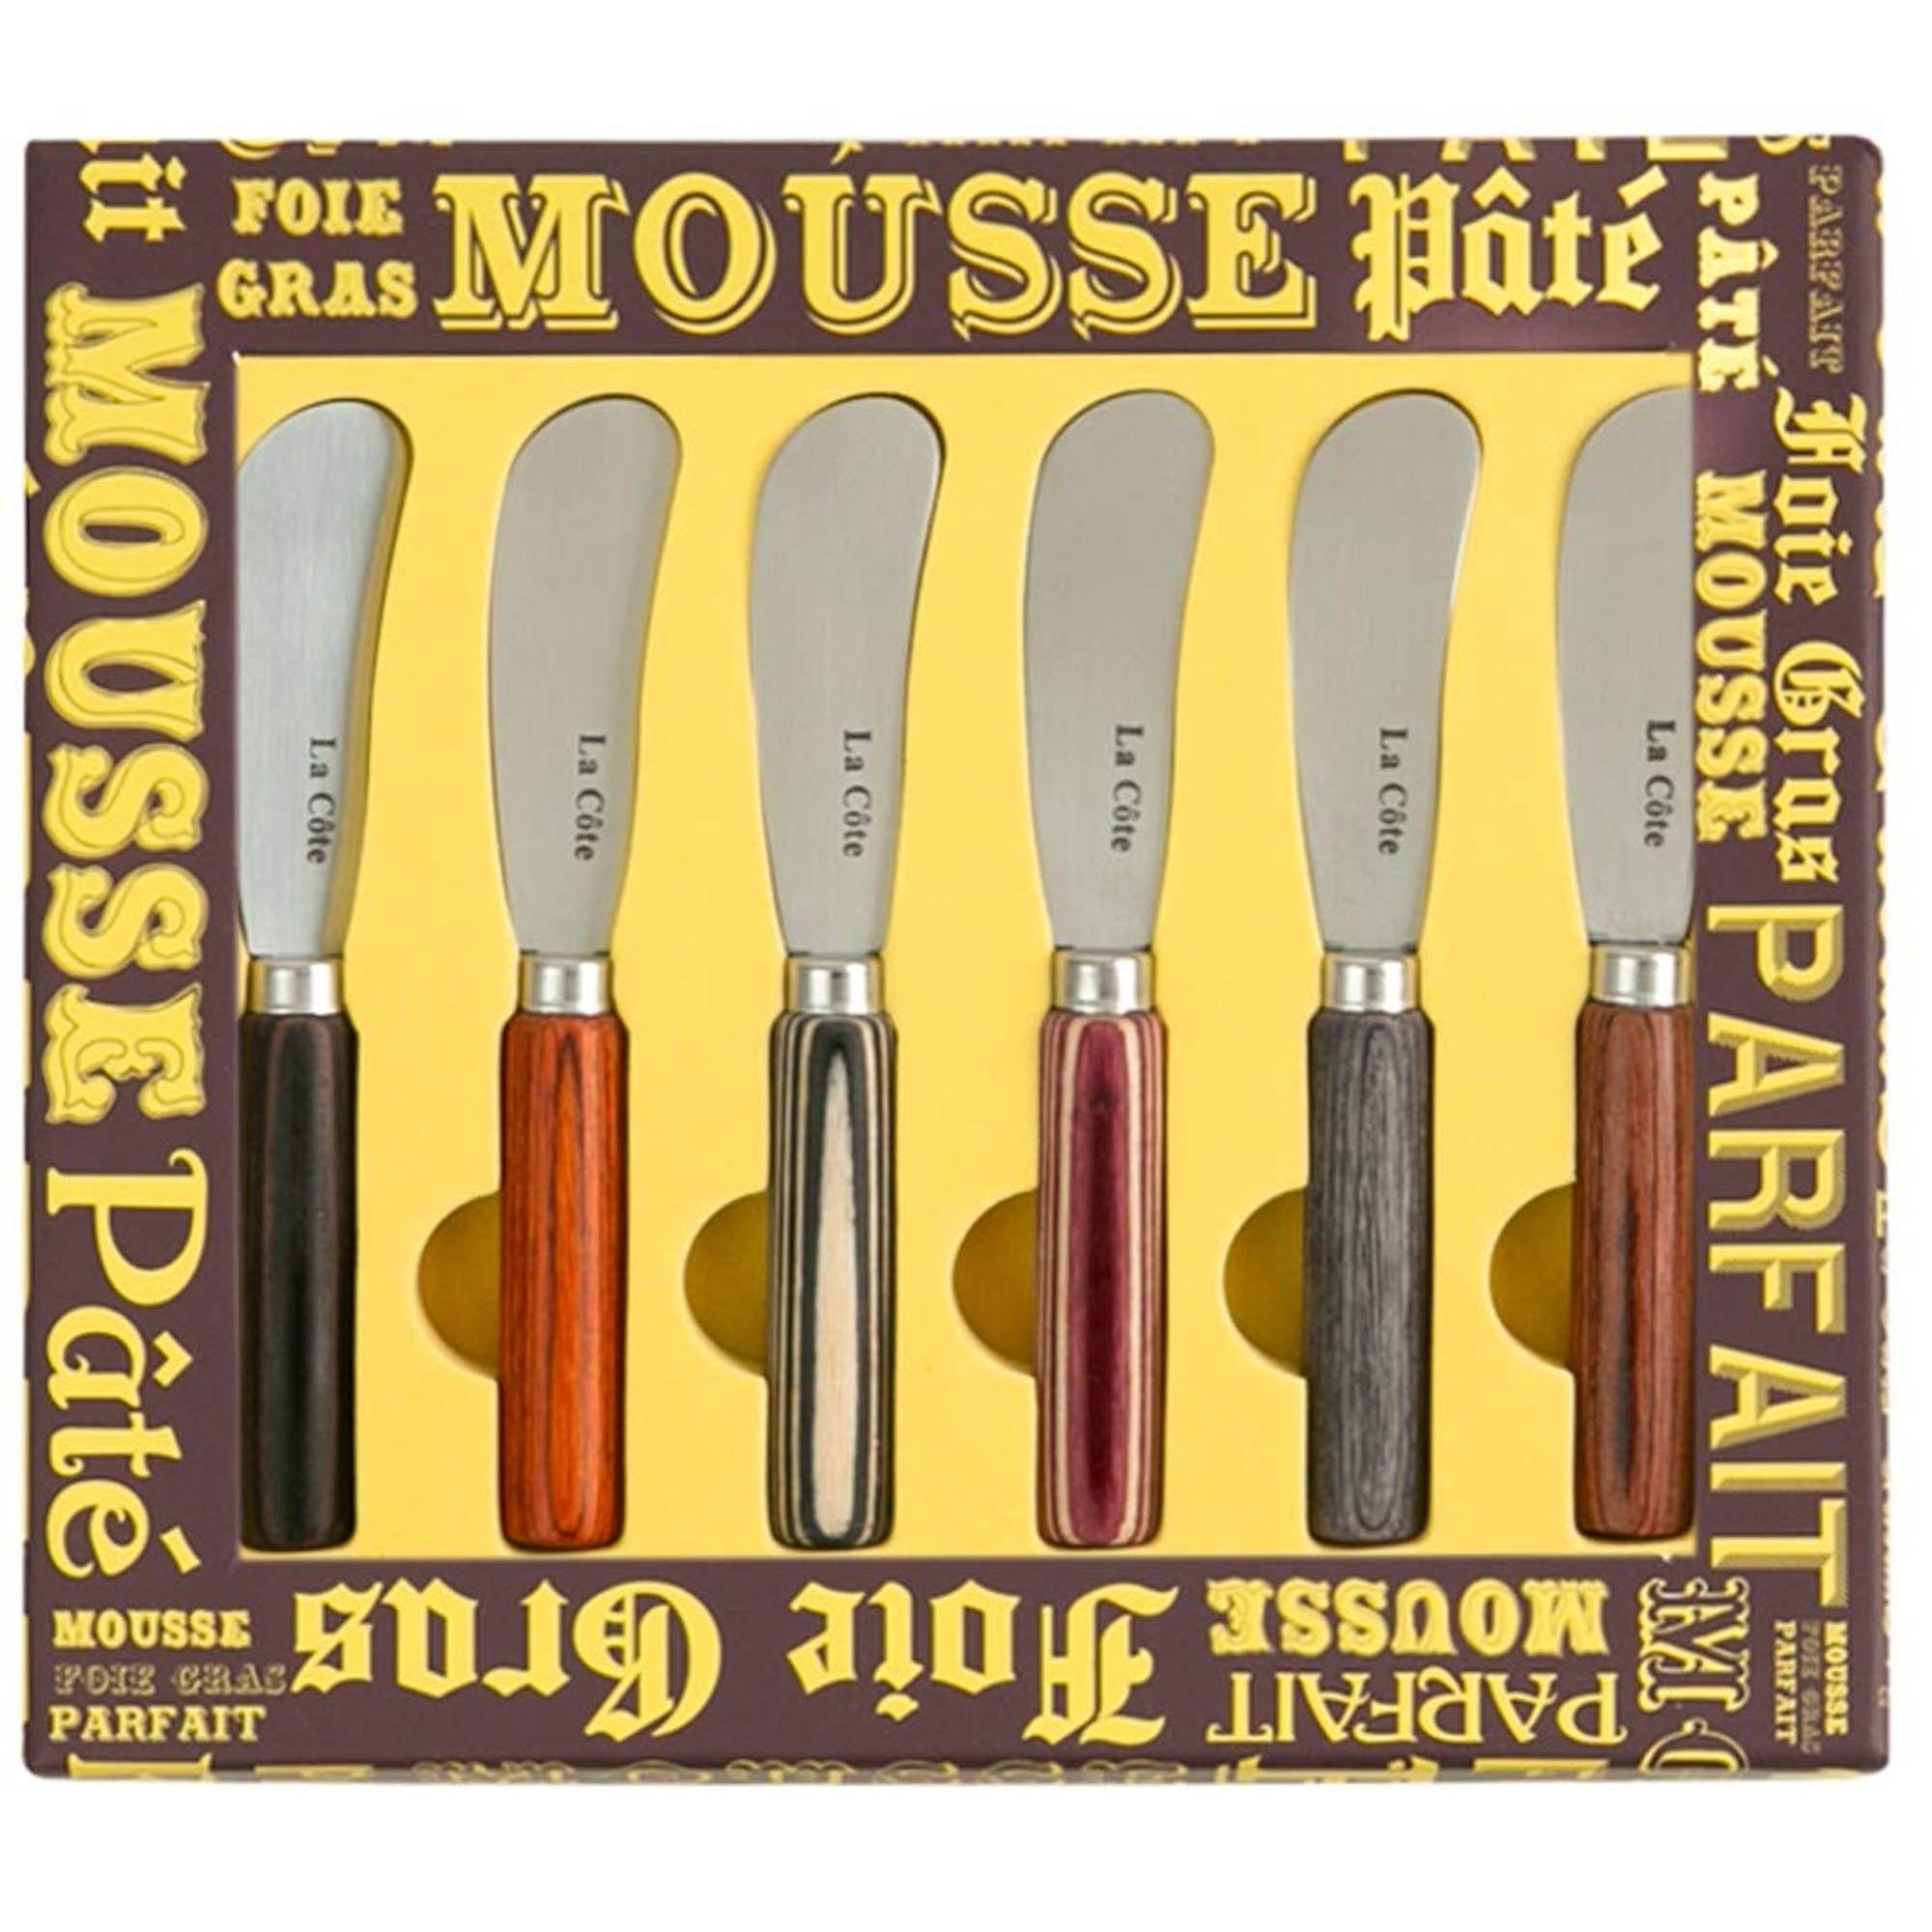 Stainless Steel Carving Set, 6 Piece